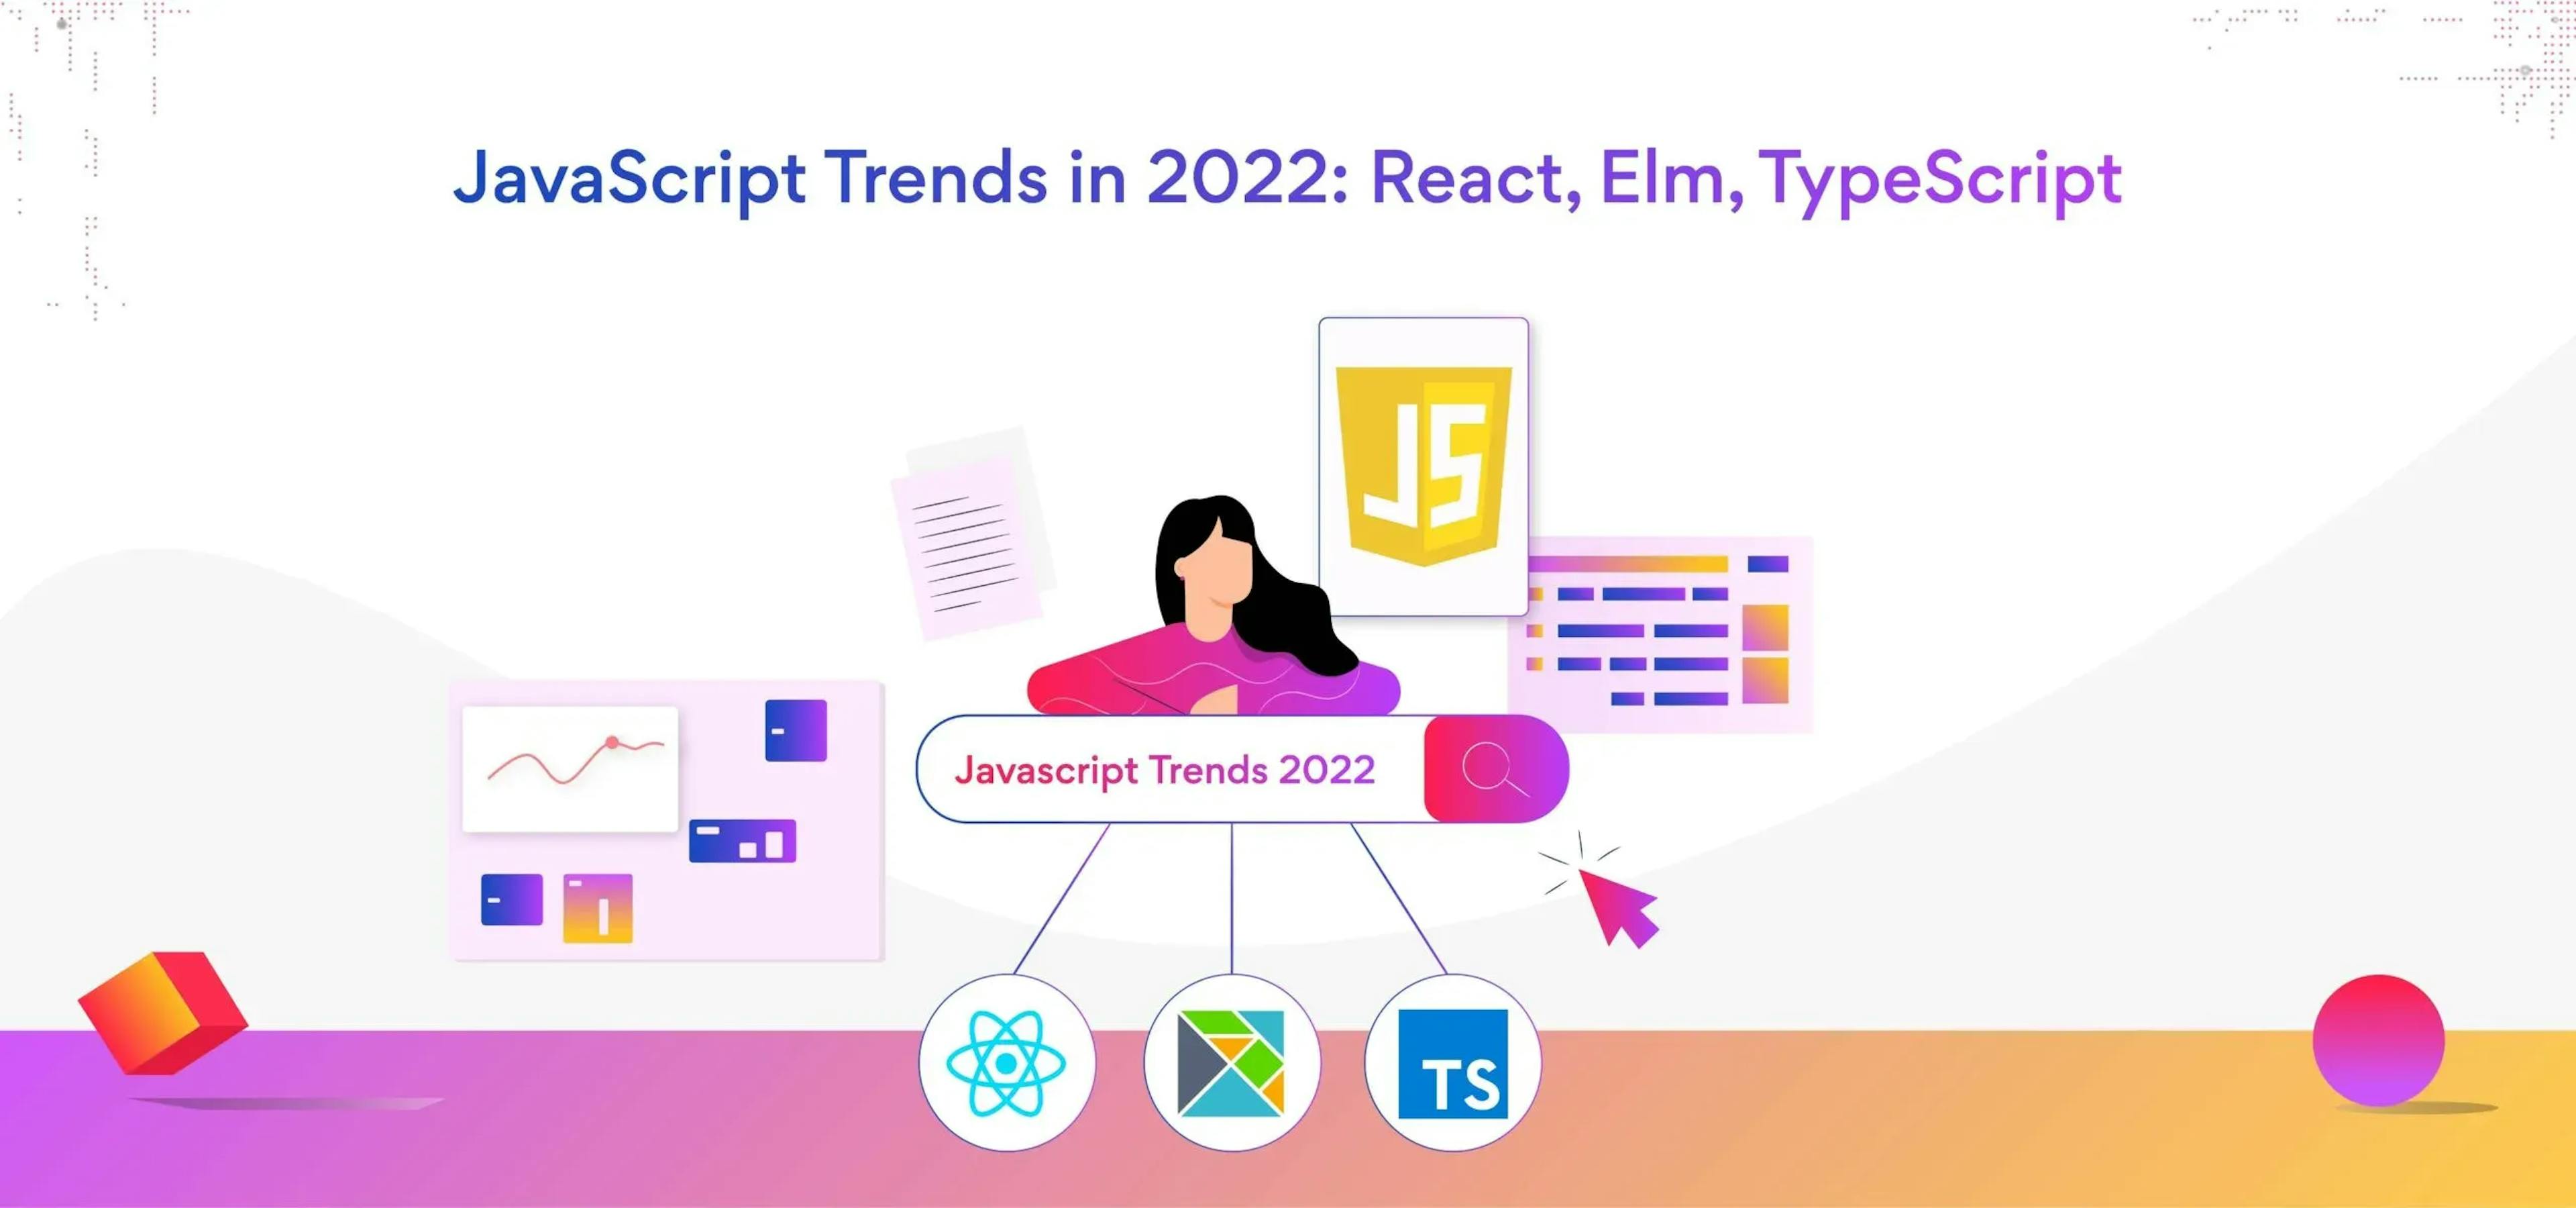 JavaScript trends in 2022: Most popular front-end framework: React.JS | Most popular back-end framework: Next.JS |